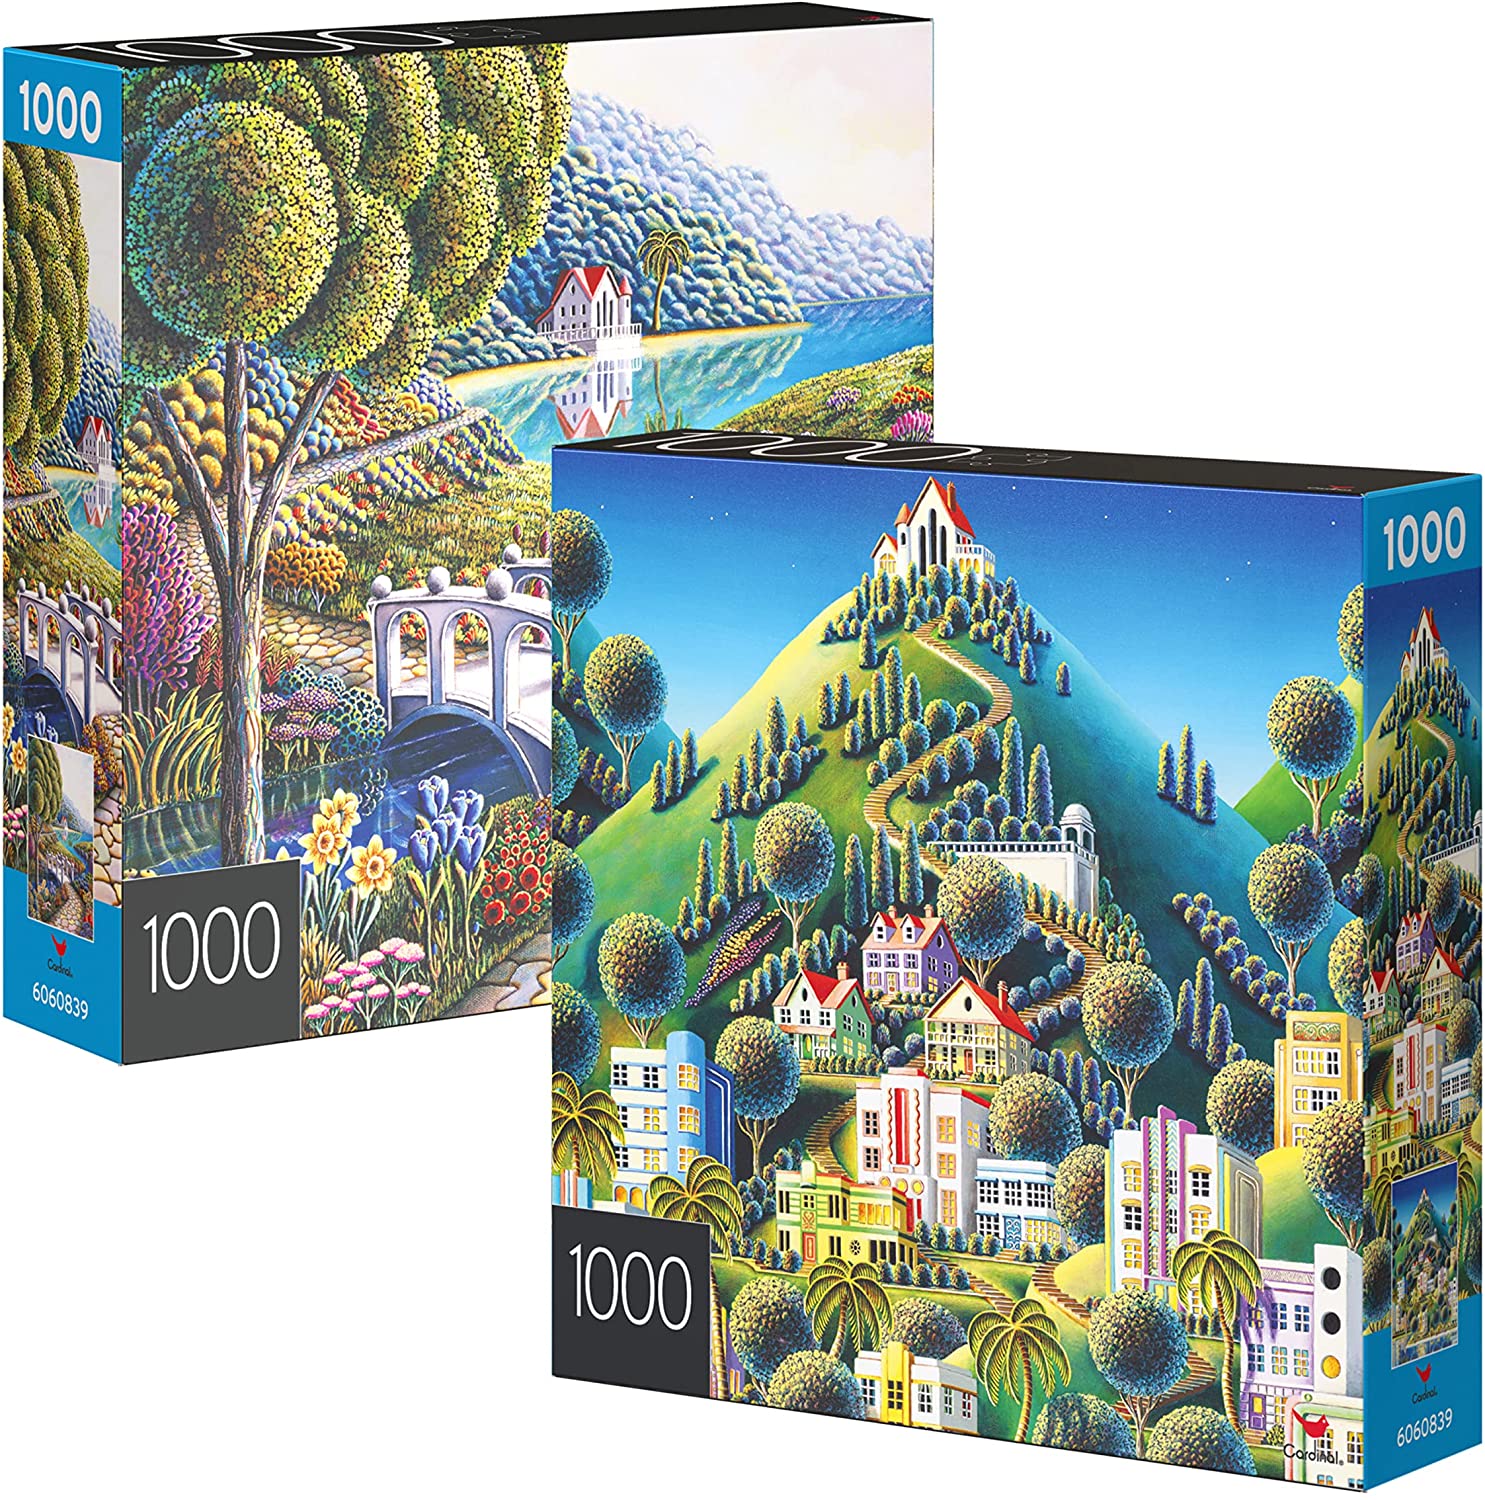 2-Pack 1000-Piece Spin Master Store Jigsaw Puzzles (Daffodils & Hidden Village) $7.21 + Free Shipping w/ Prime or Orders $25+